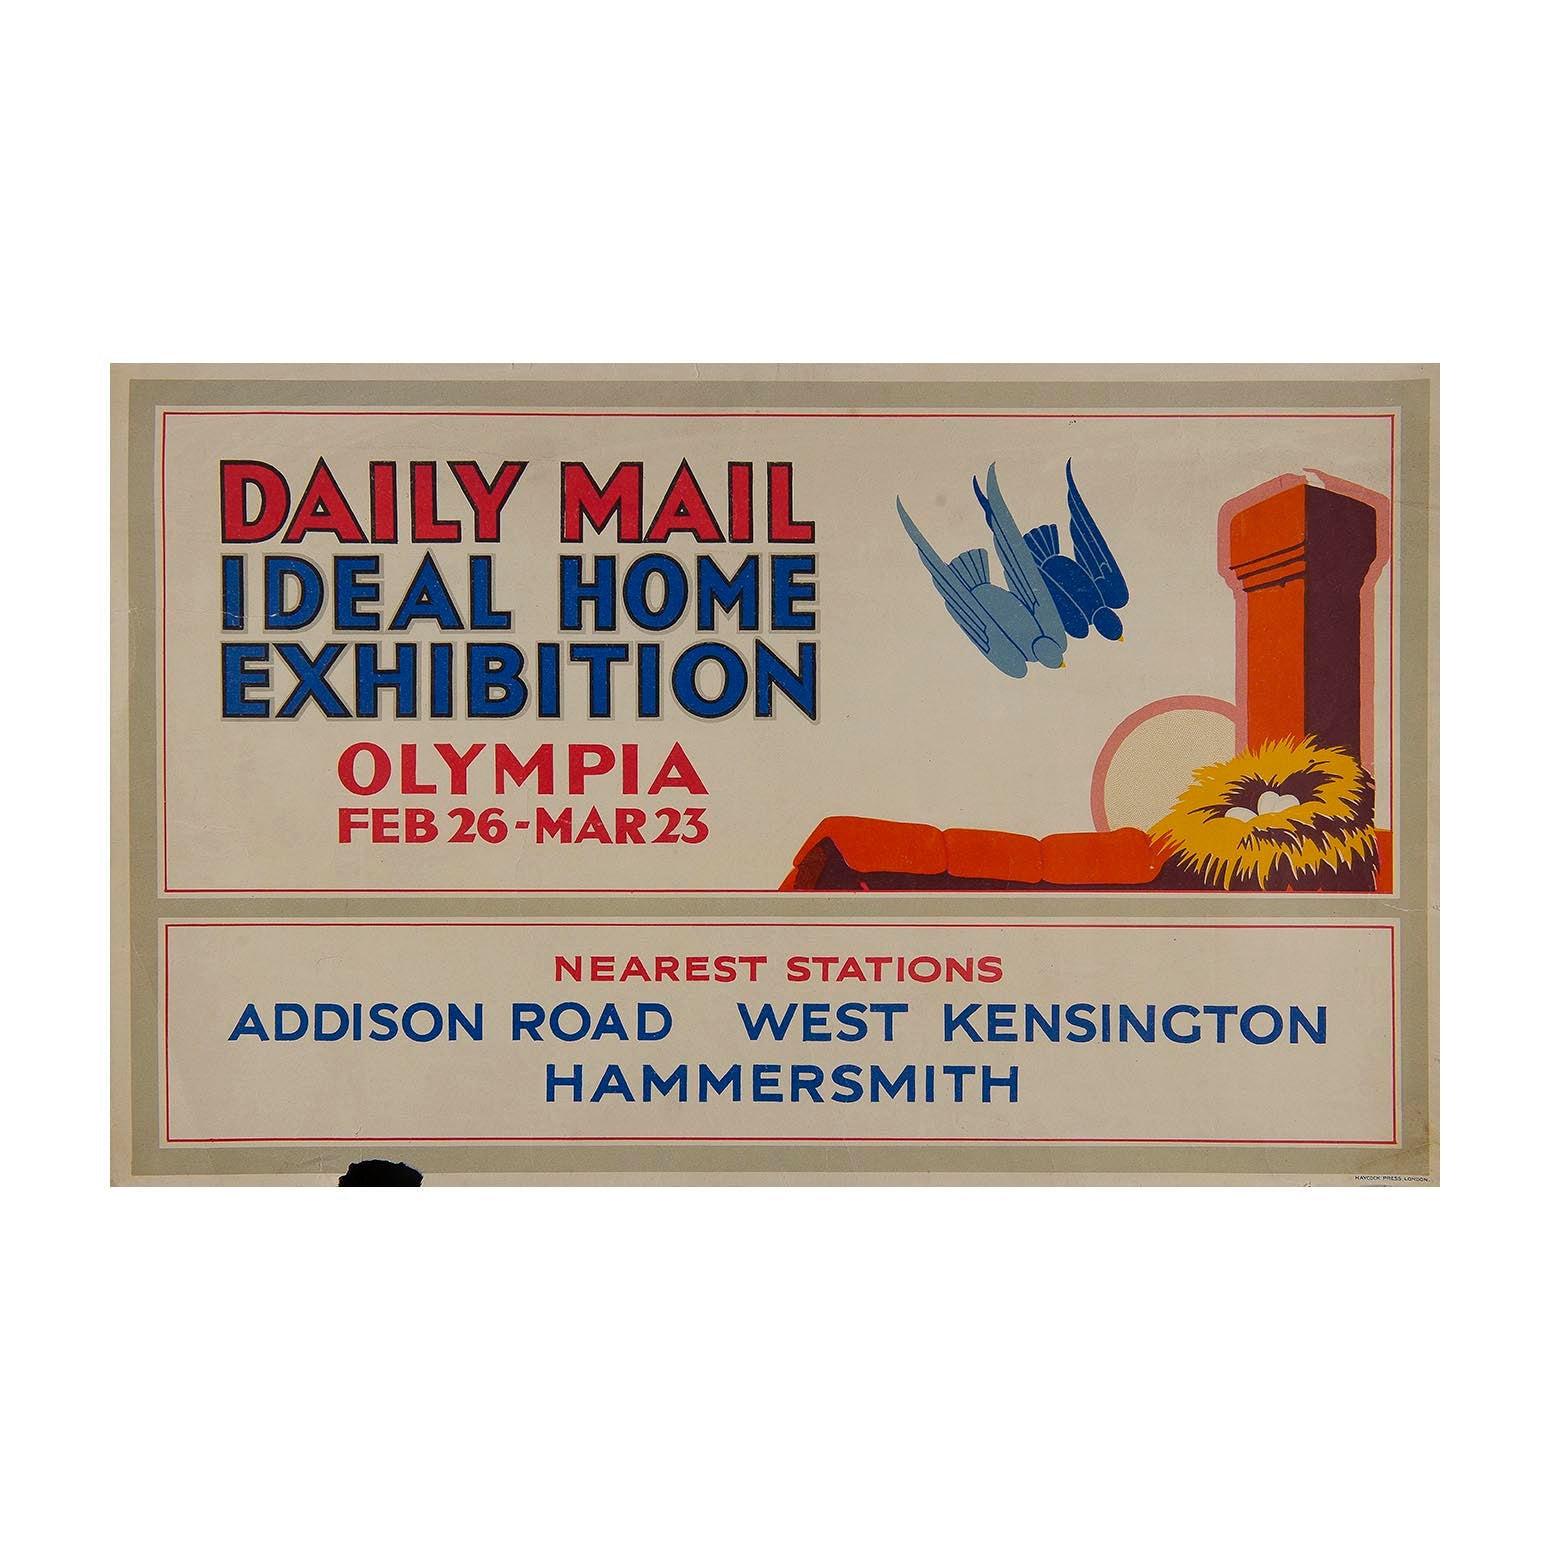 Daily Mail Ideal Homes Exhibition